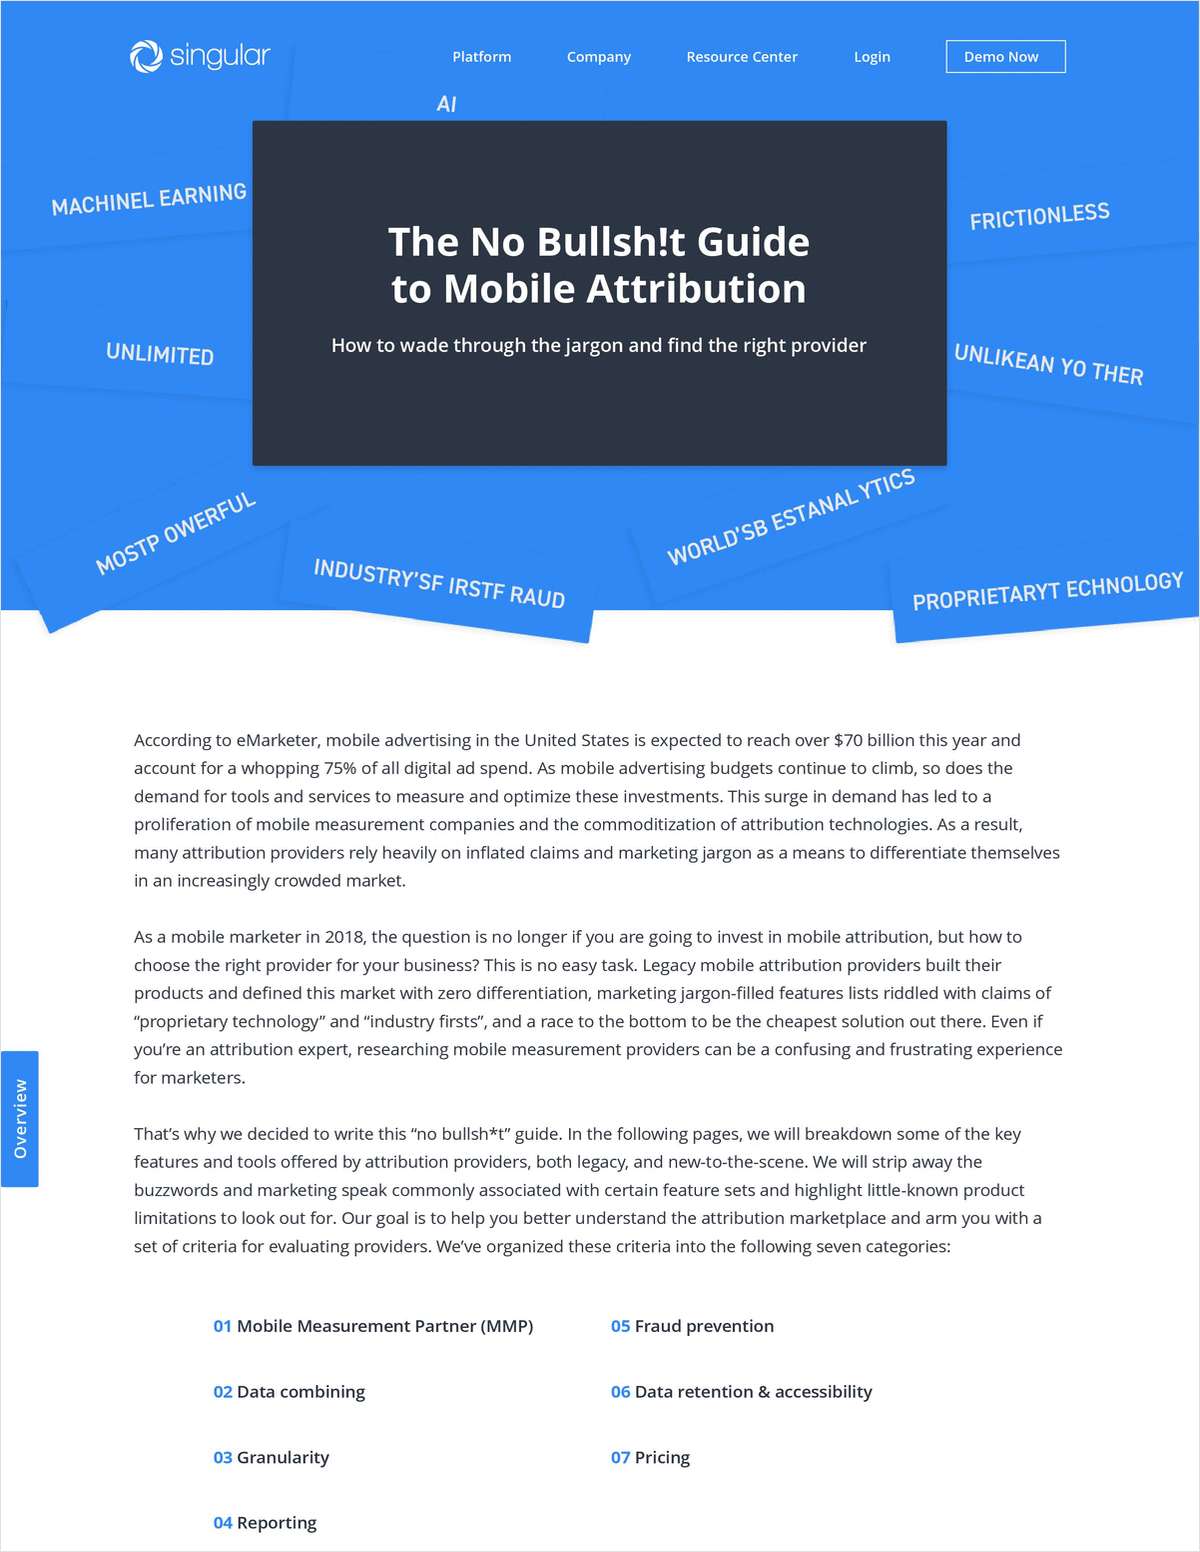 Mobile Attribution Made Simple: The No-Frills Guide to Help You Evaluate Providers